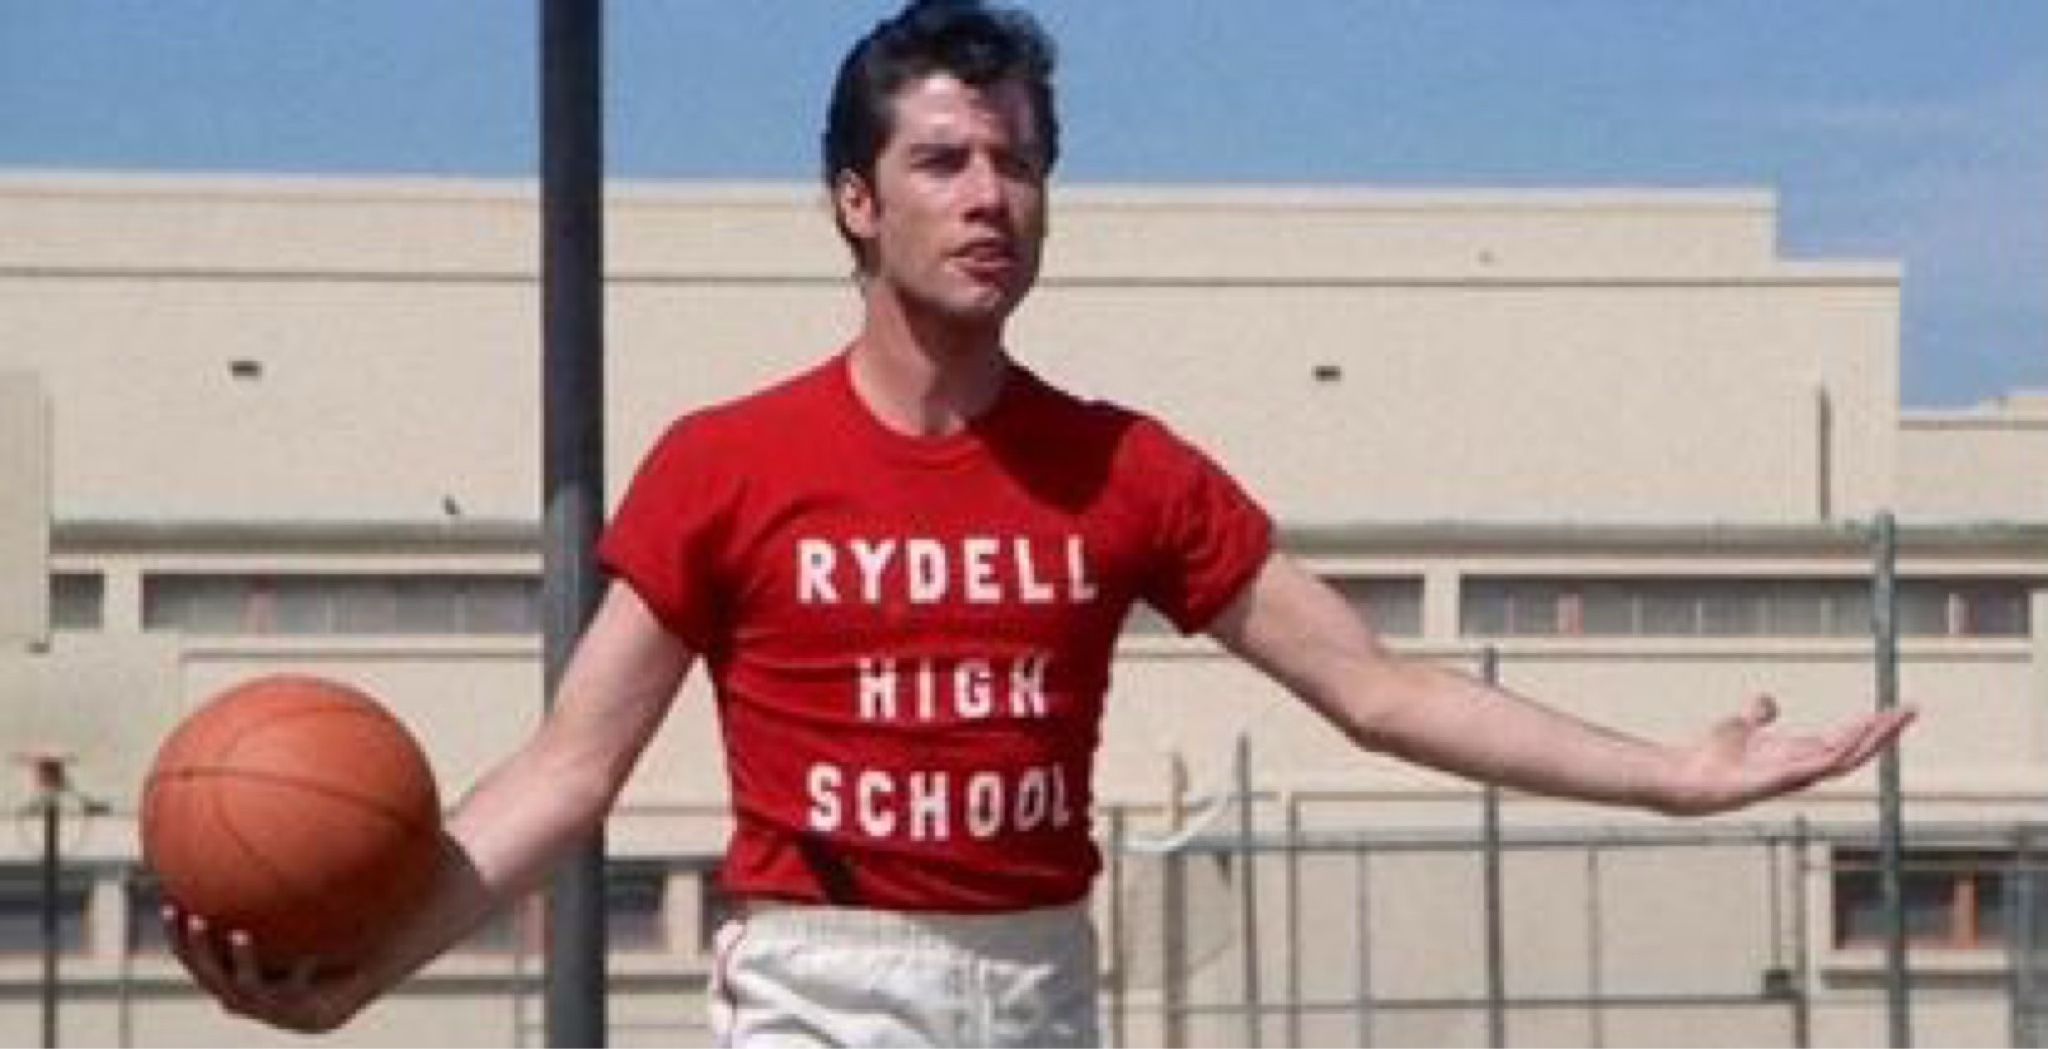 10 Things That Make No Sense About Grease RELATED Where Are They Now The Cast Of Grease